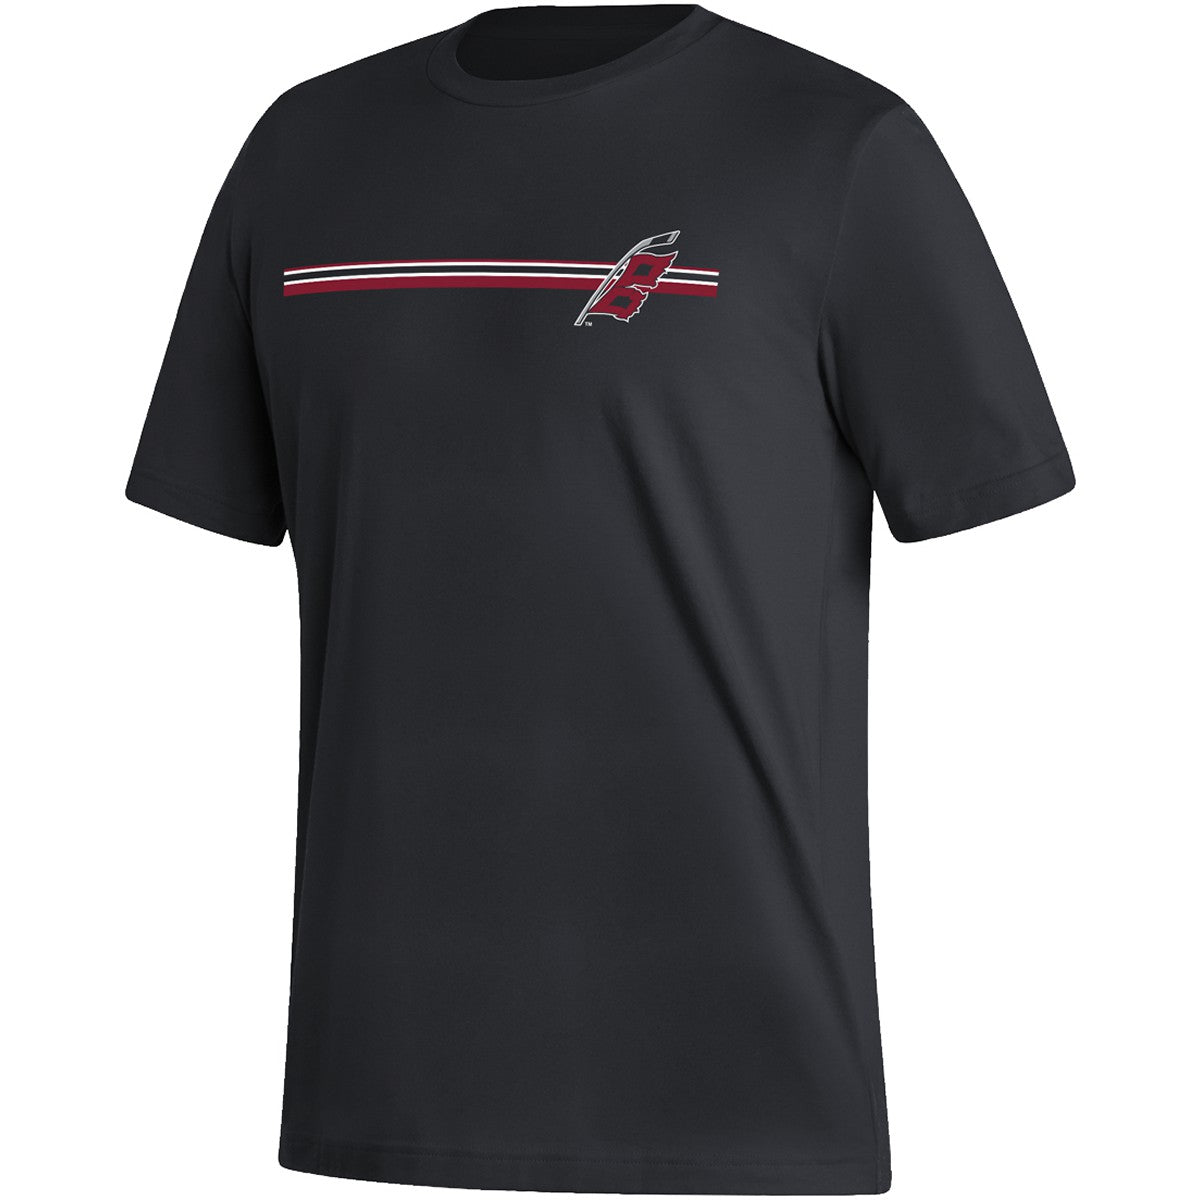 Front View: Black tee with Hurricanes flag logo and small striping at chest.